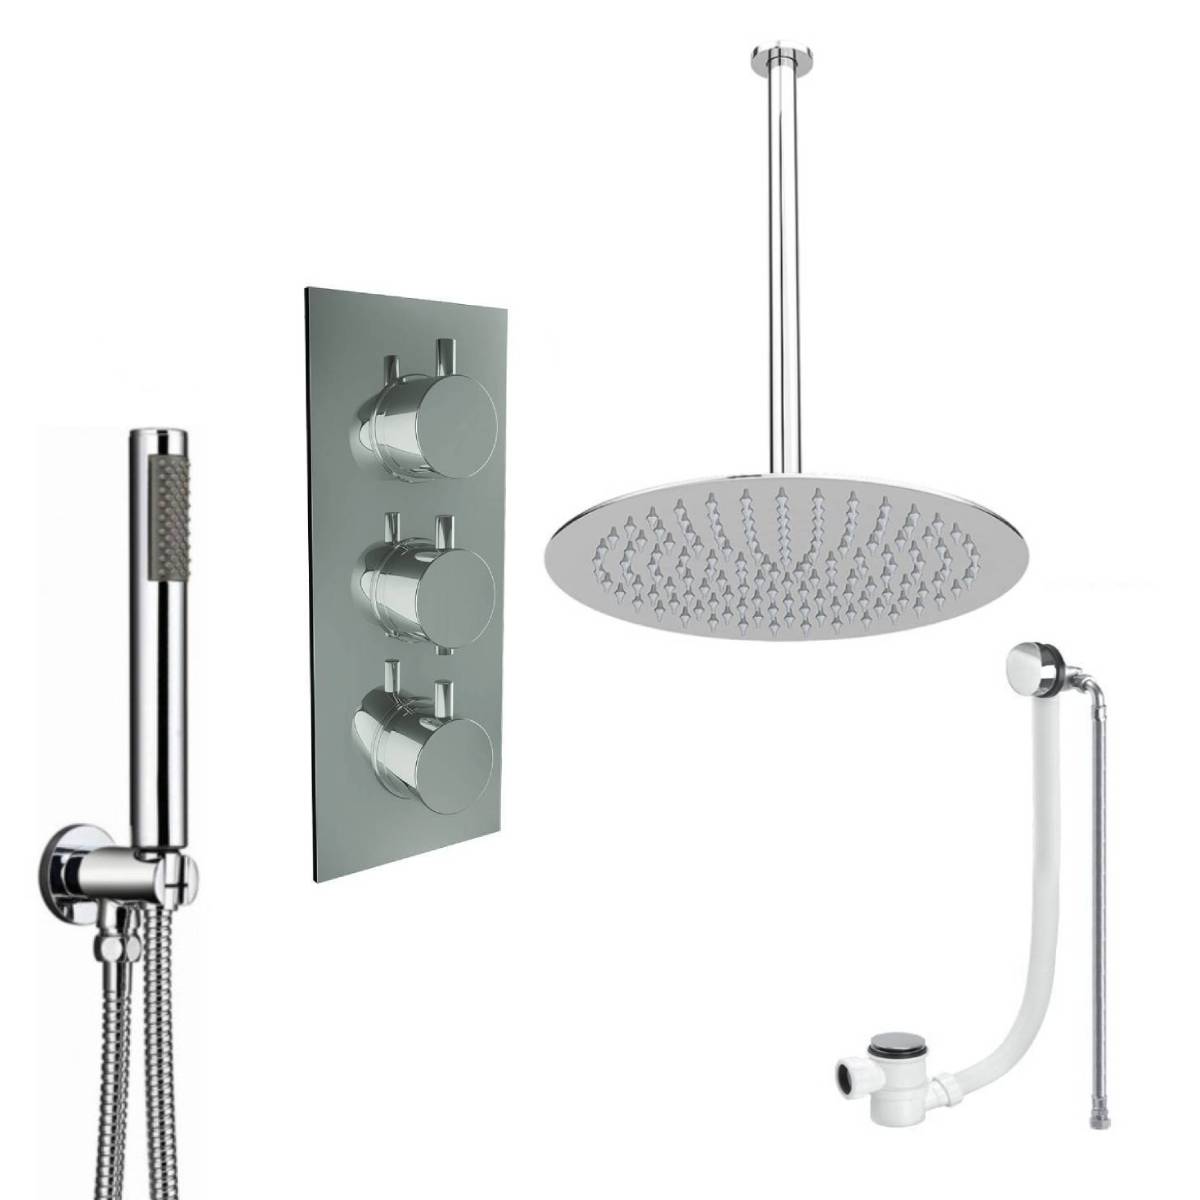 Round Triple Thermostatic Concealed Mixer Shower Kit with Ceiling Mounted 300mm Shower Head, Handset & Overflow Filler (12488)